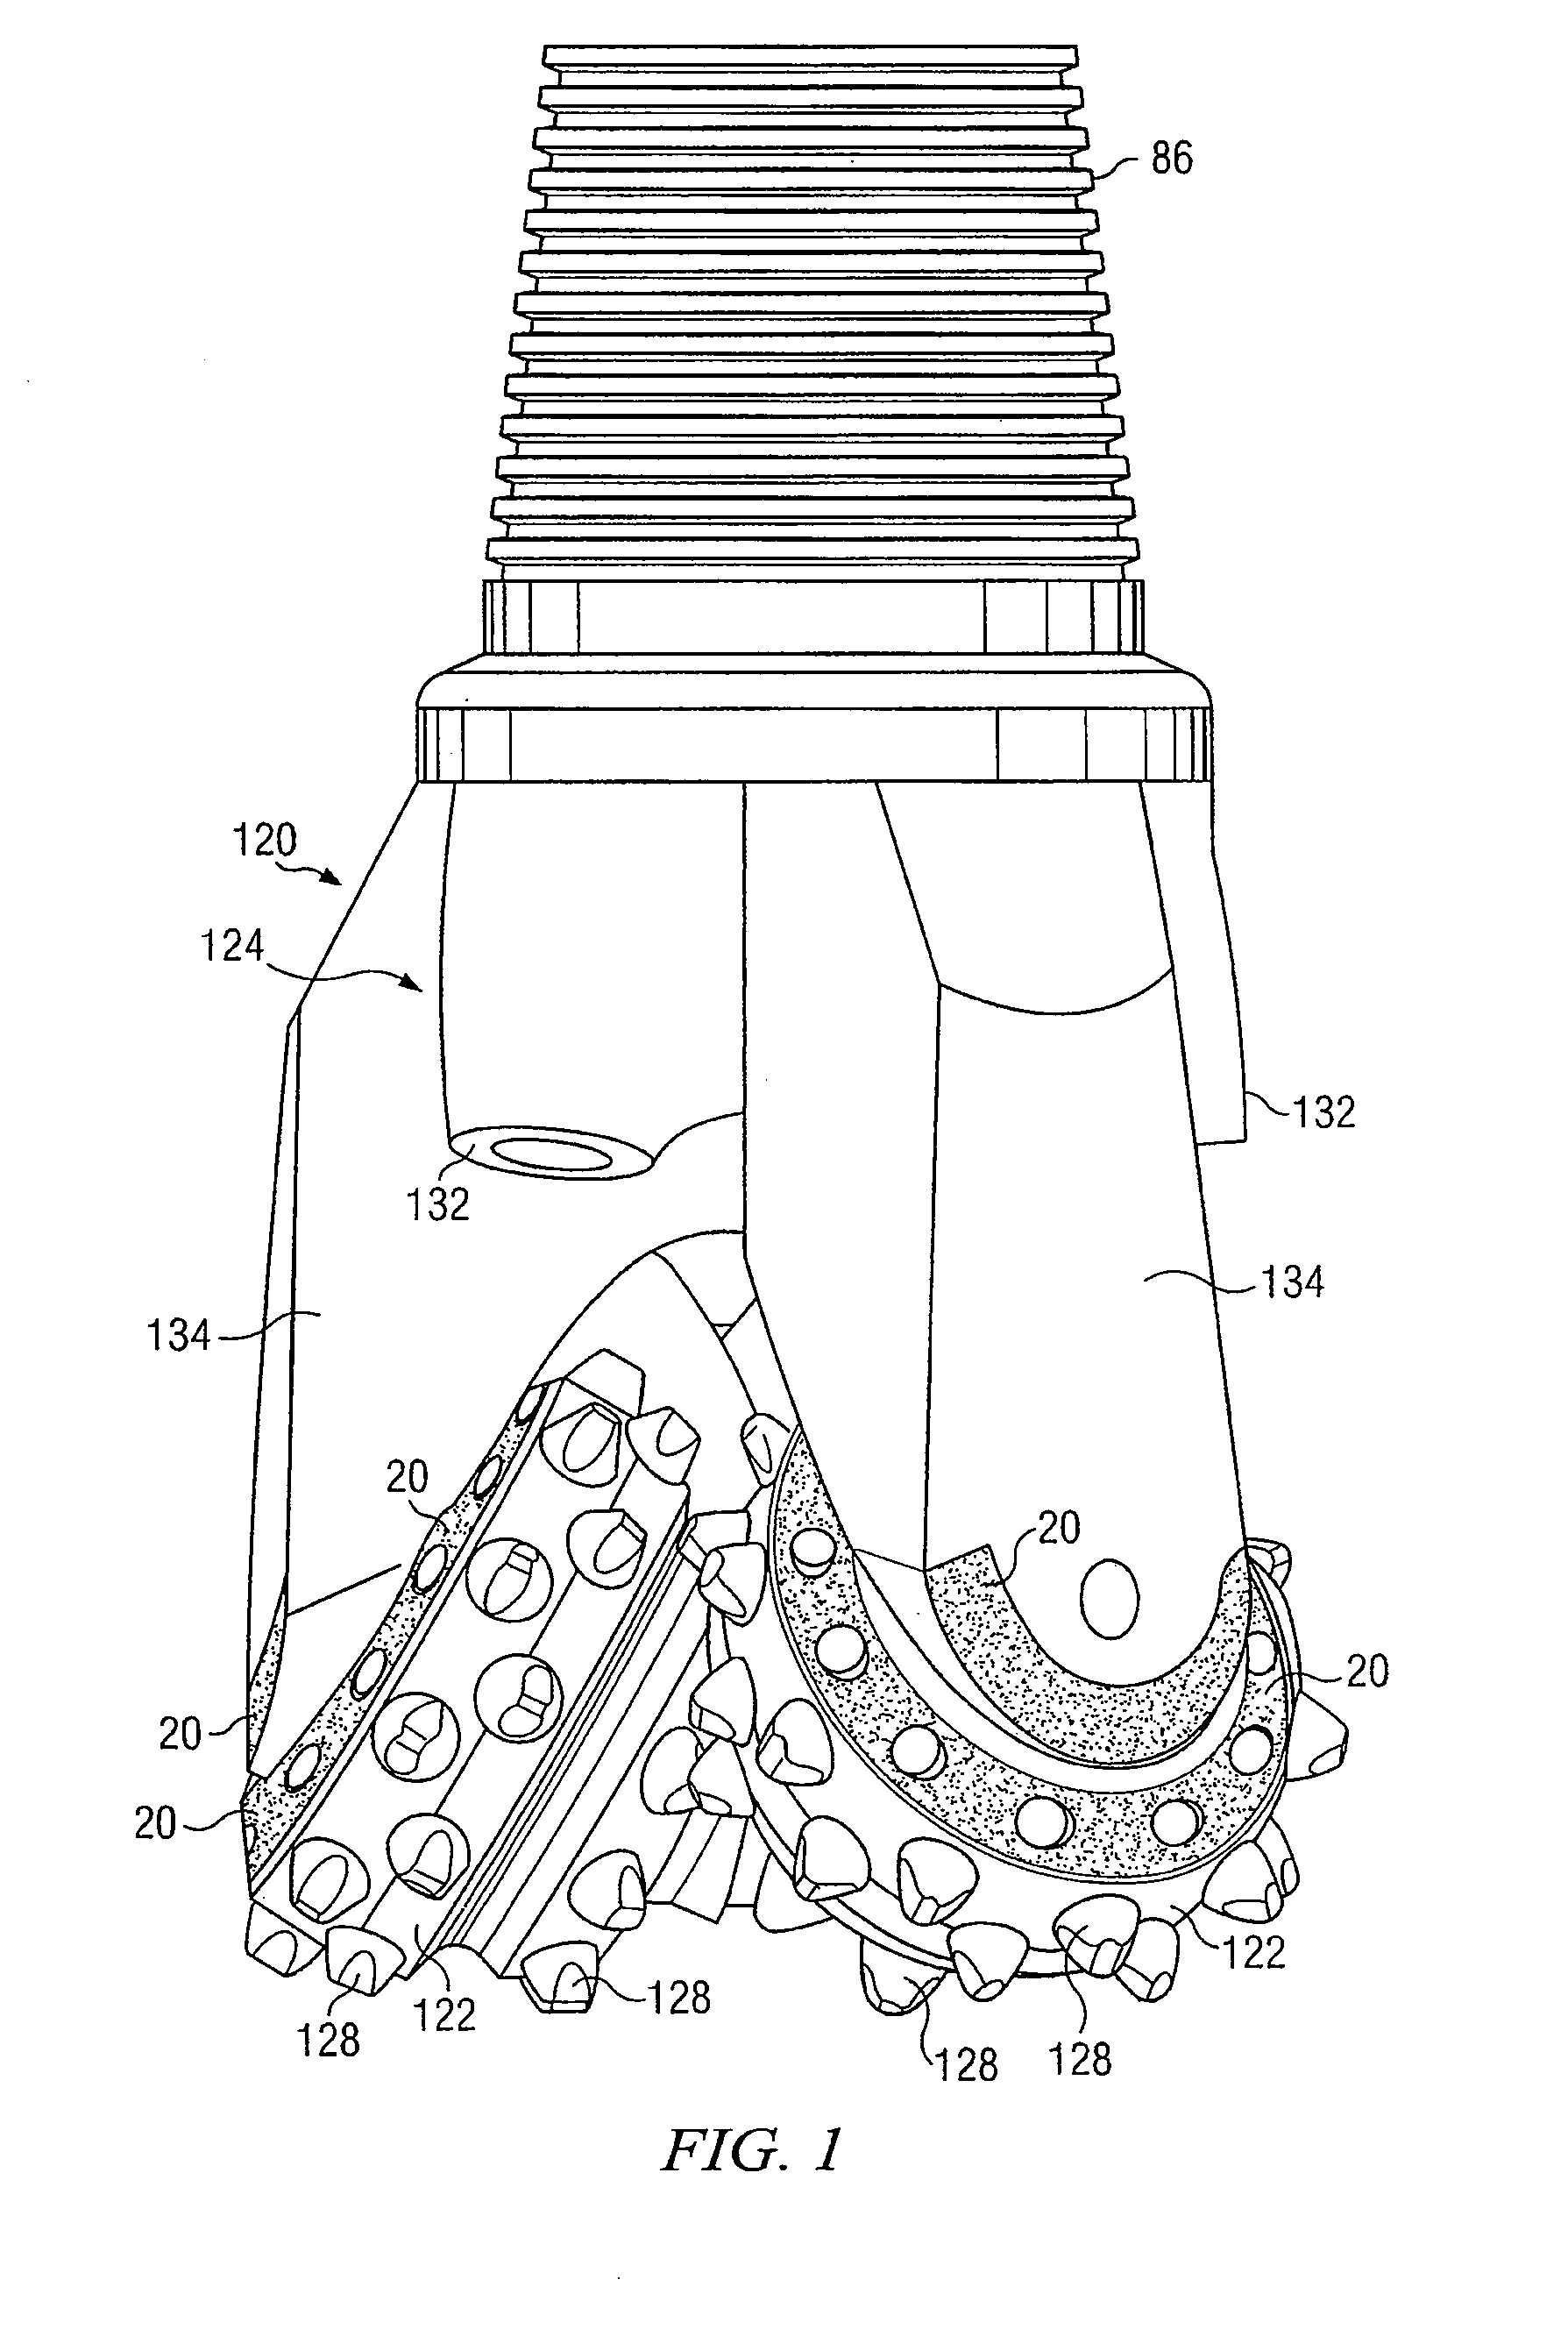 Drill bits and other downhole tools with hardfacing having tungsten carbide pellets and other hard materials